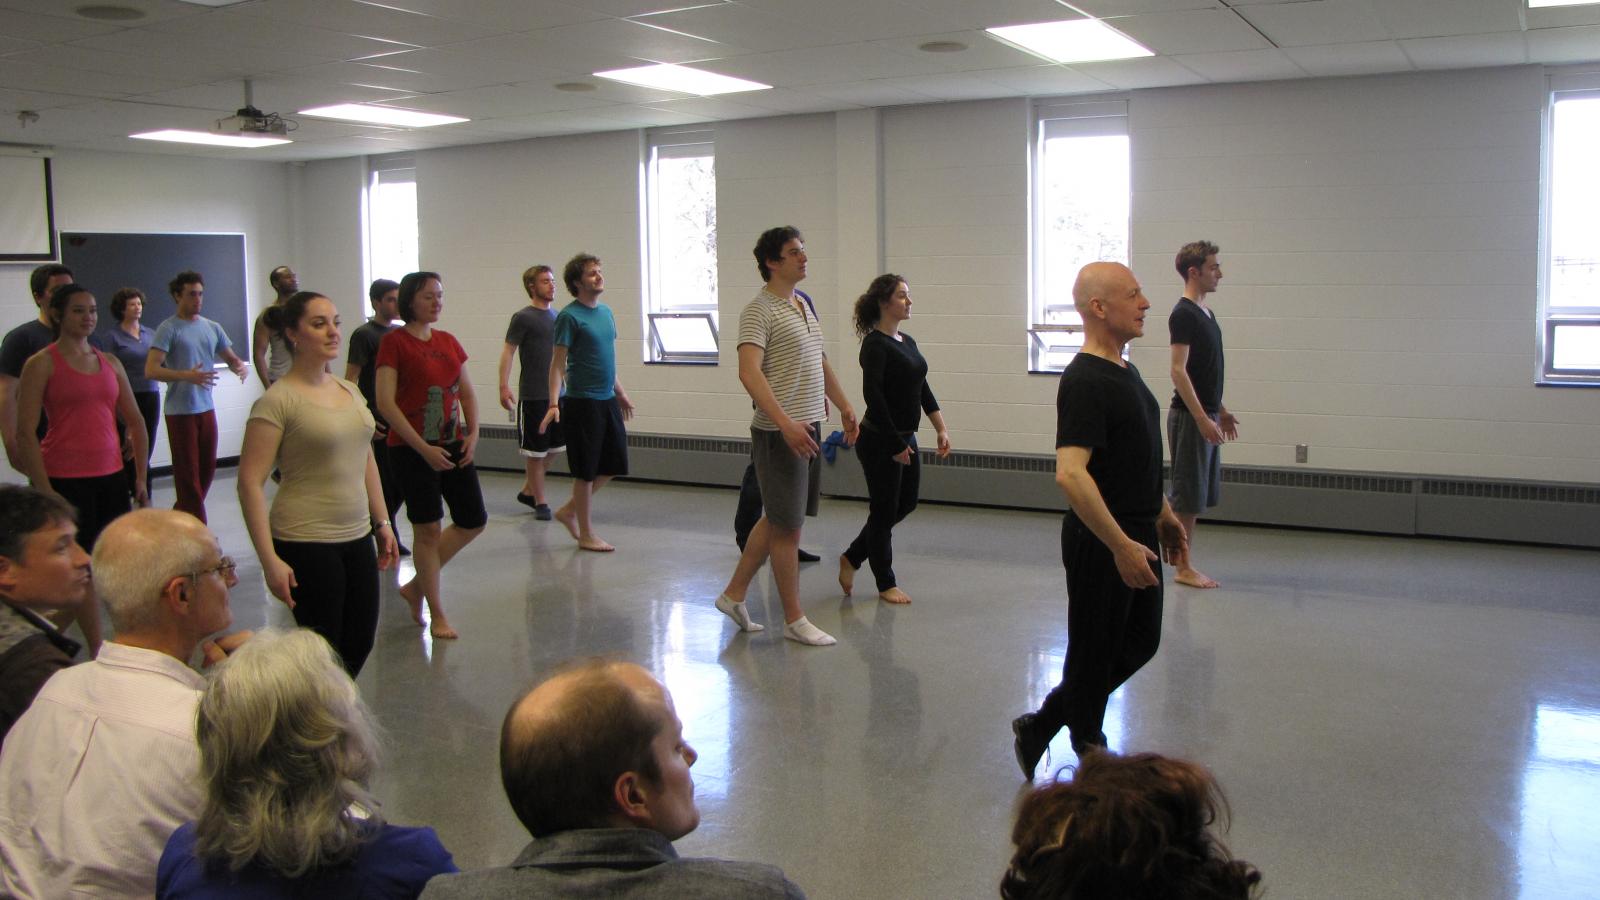 Professional Actor, Mime Artist, and Artistic Co-Director of Happenstance Theater Mark Jaster leads his workshop, “Decroux and Marceau: A Comparative Study of Two Short Études.”